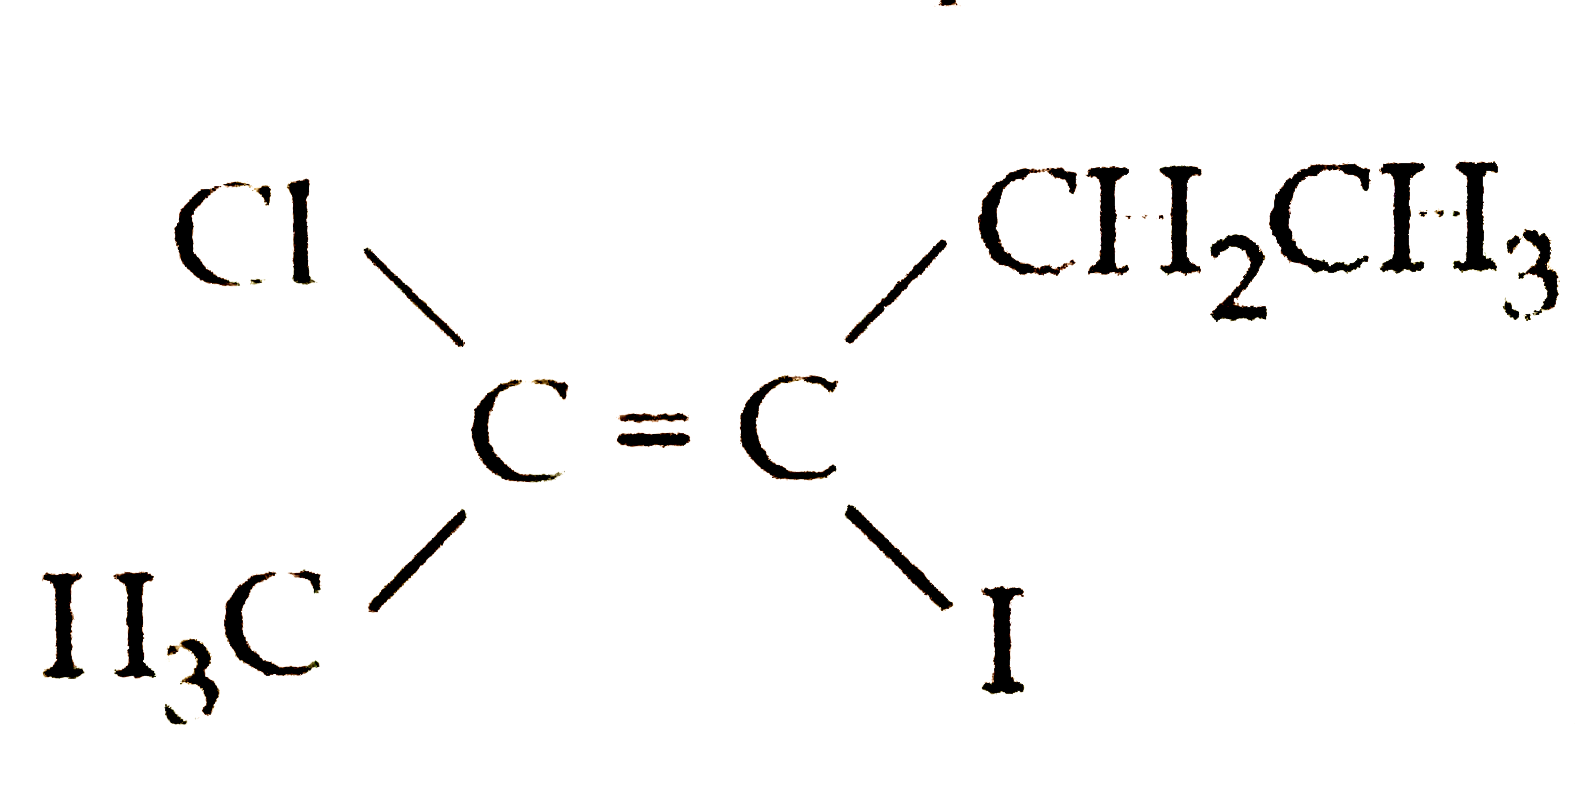 IUPAC name for the compound